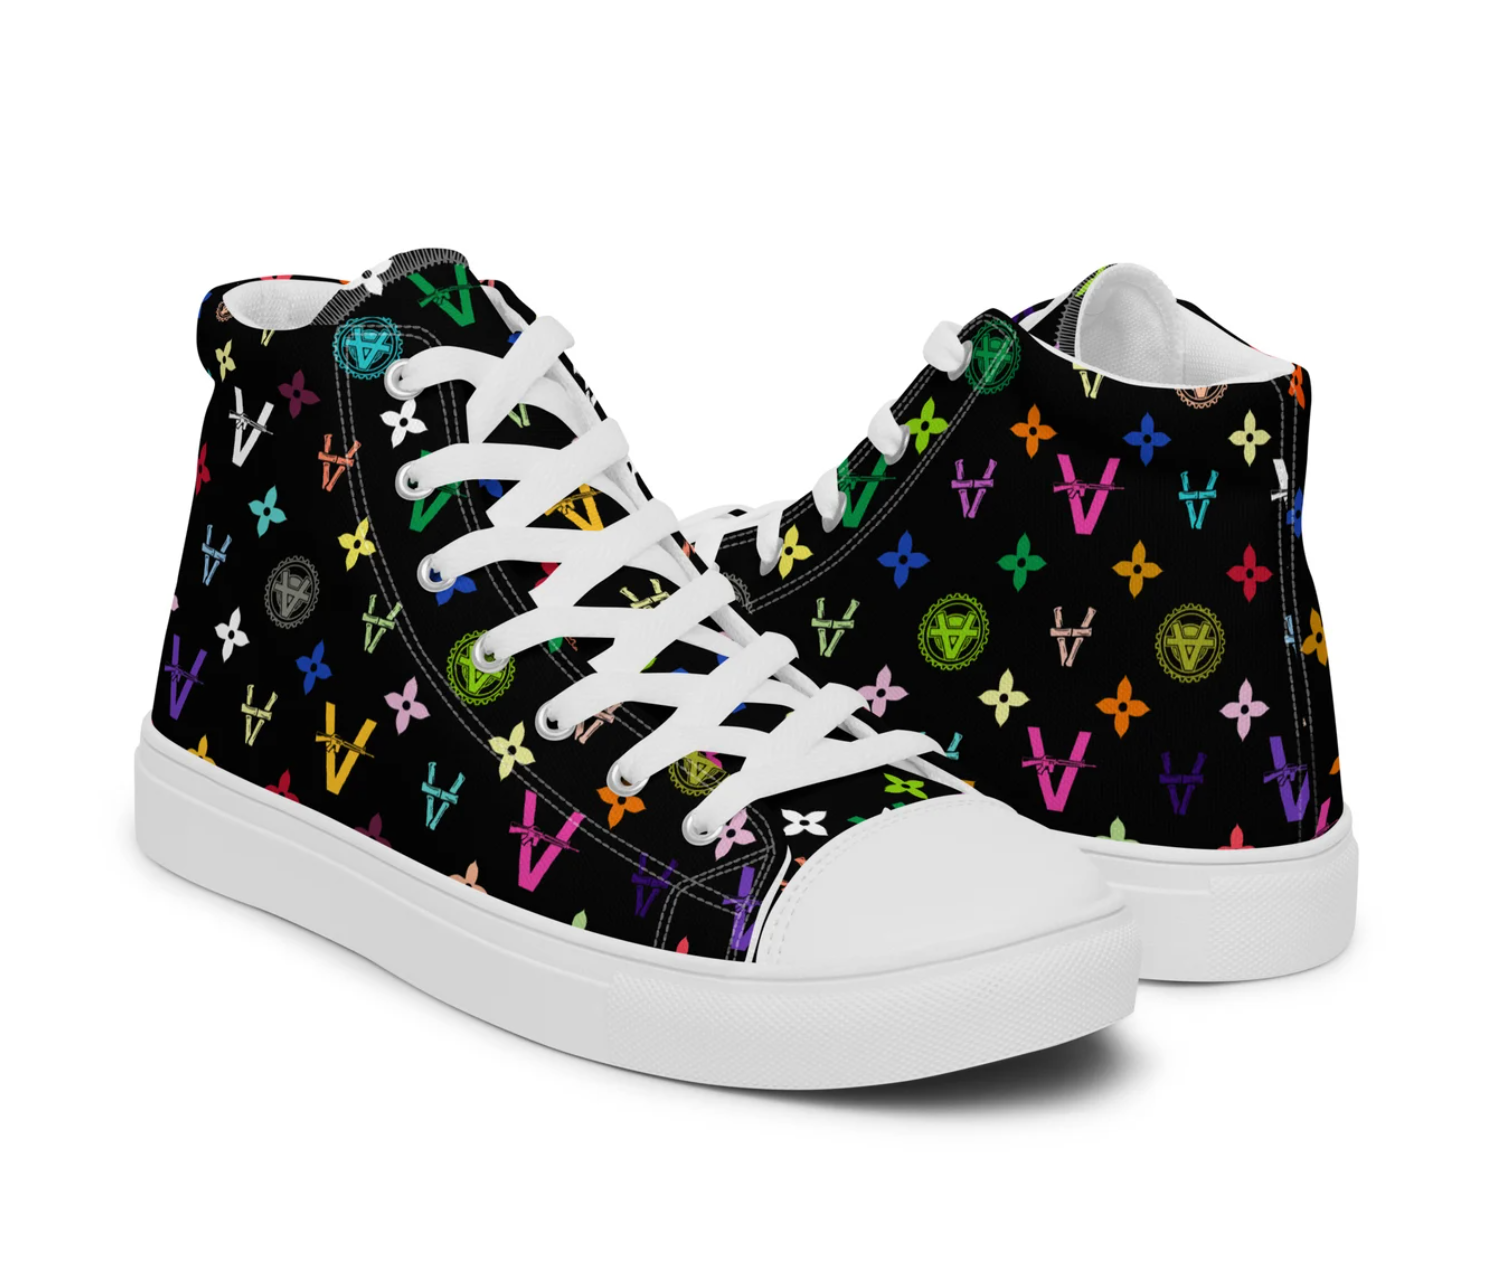 The Vandals High Top Sneaker by Sergio Georgini – The Vandals